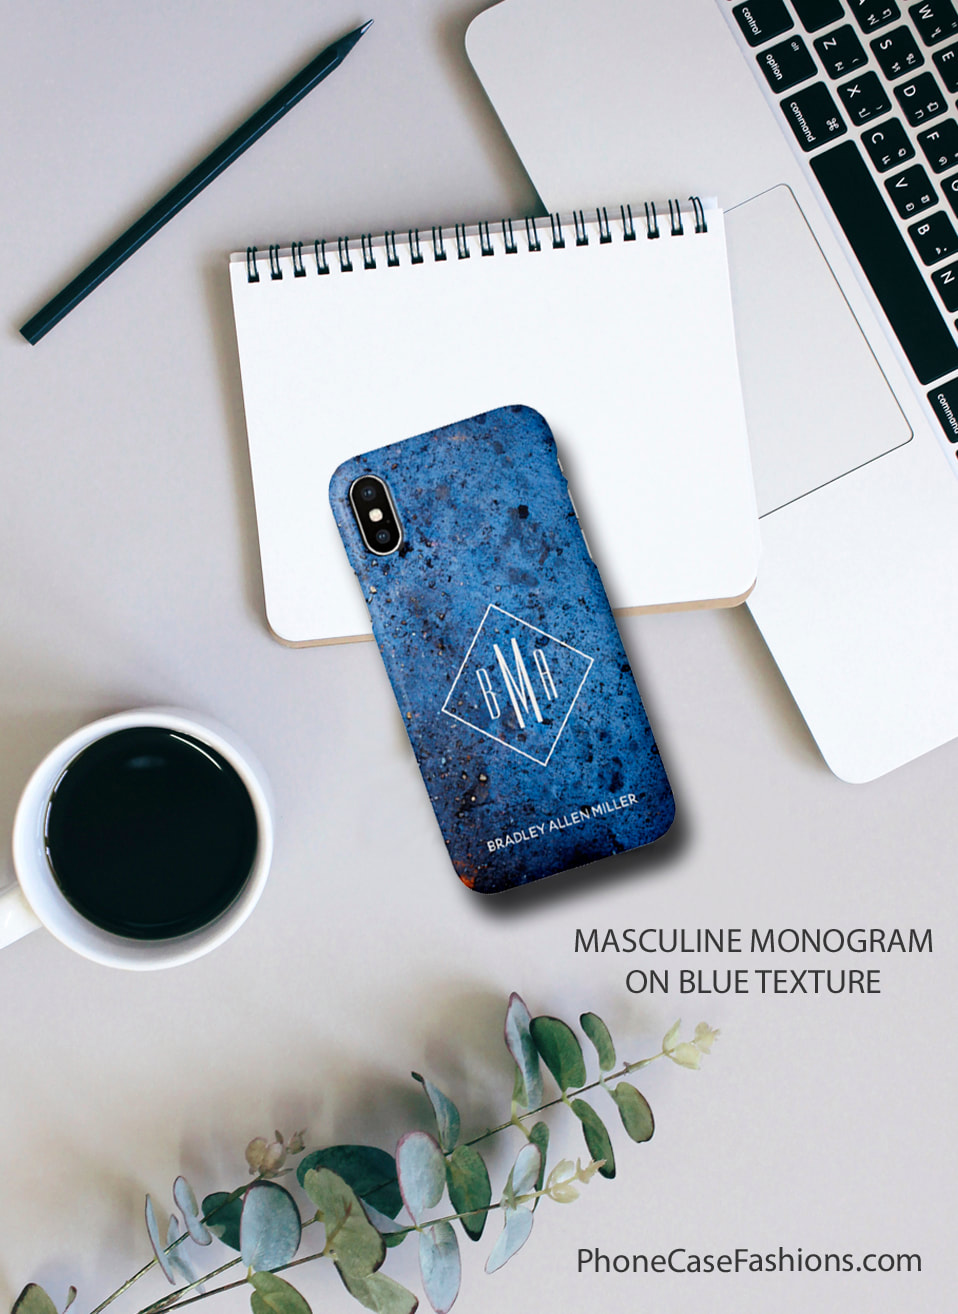 Men now have more choices than a black cell phone case. Our Blue Texture design is cool as is or add our initials, monogram and or your name. Don't hide behind an ugly phone case, design one you'll love.  Shop PhoneCaseFashions.com to design a case you'll love.